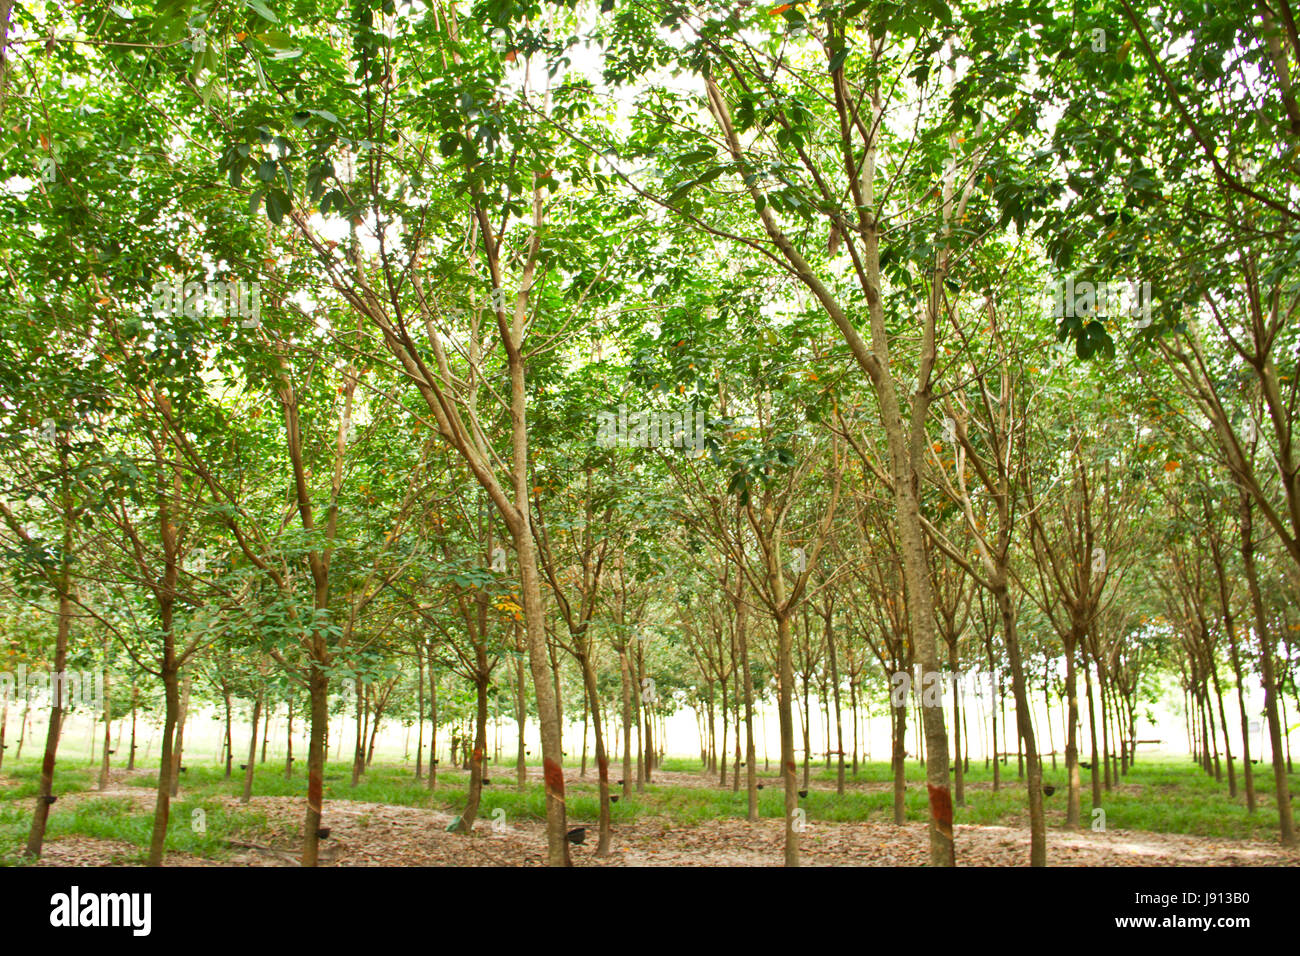 Rubber tree forest Stock Photo